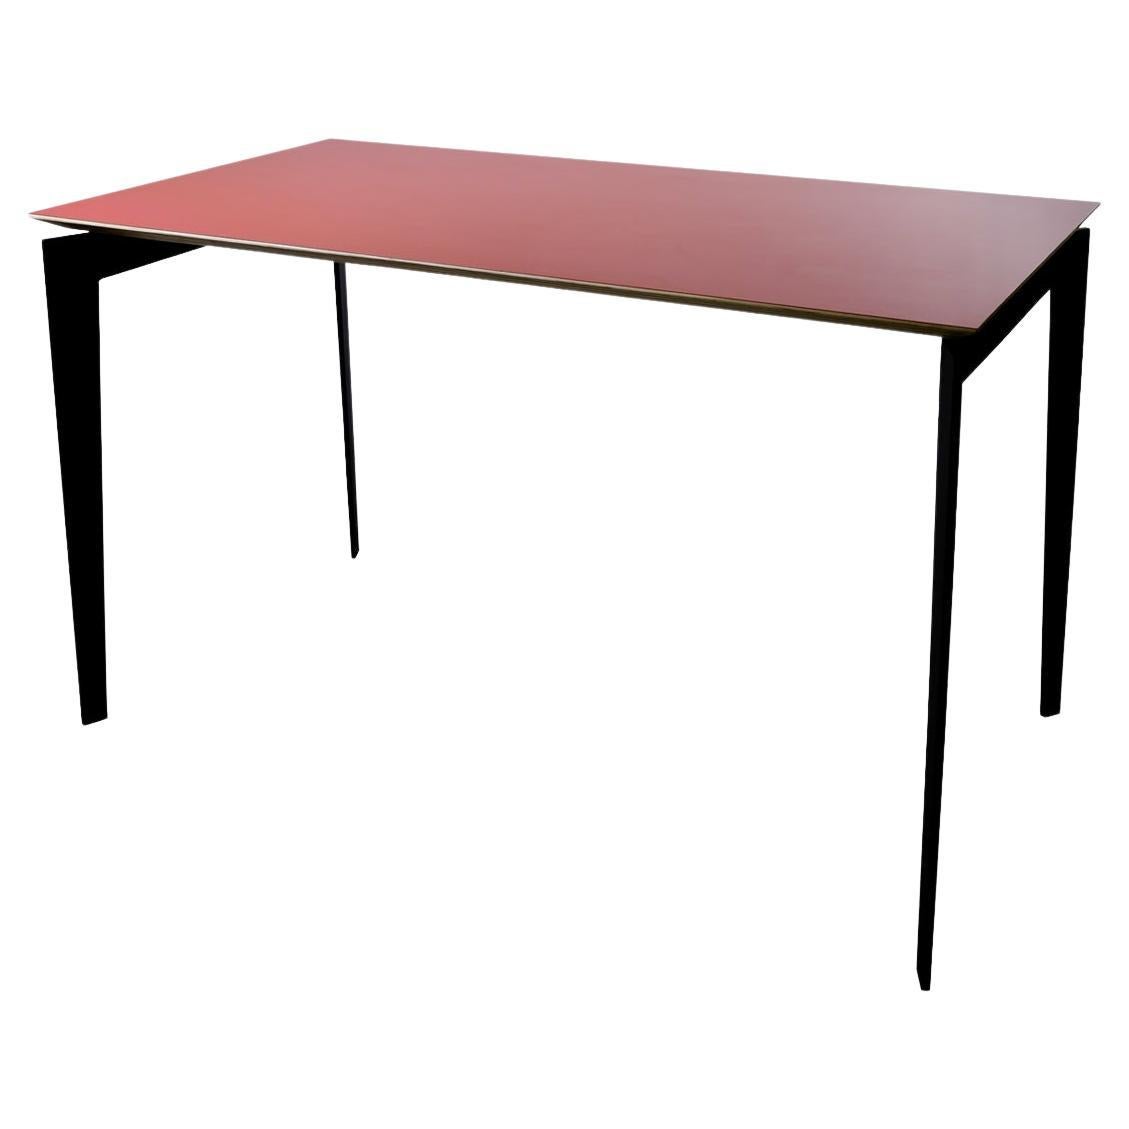 Italian Contemporary Steel and Plywood Table, "Armabianca 01" by Errante For Sale